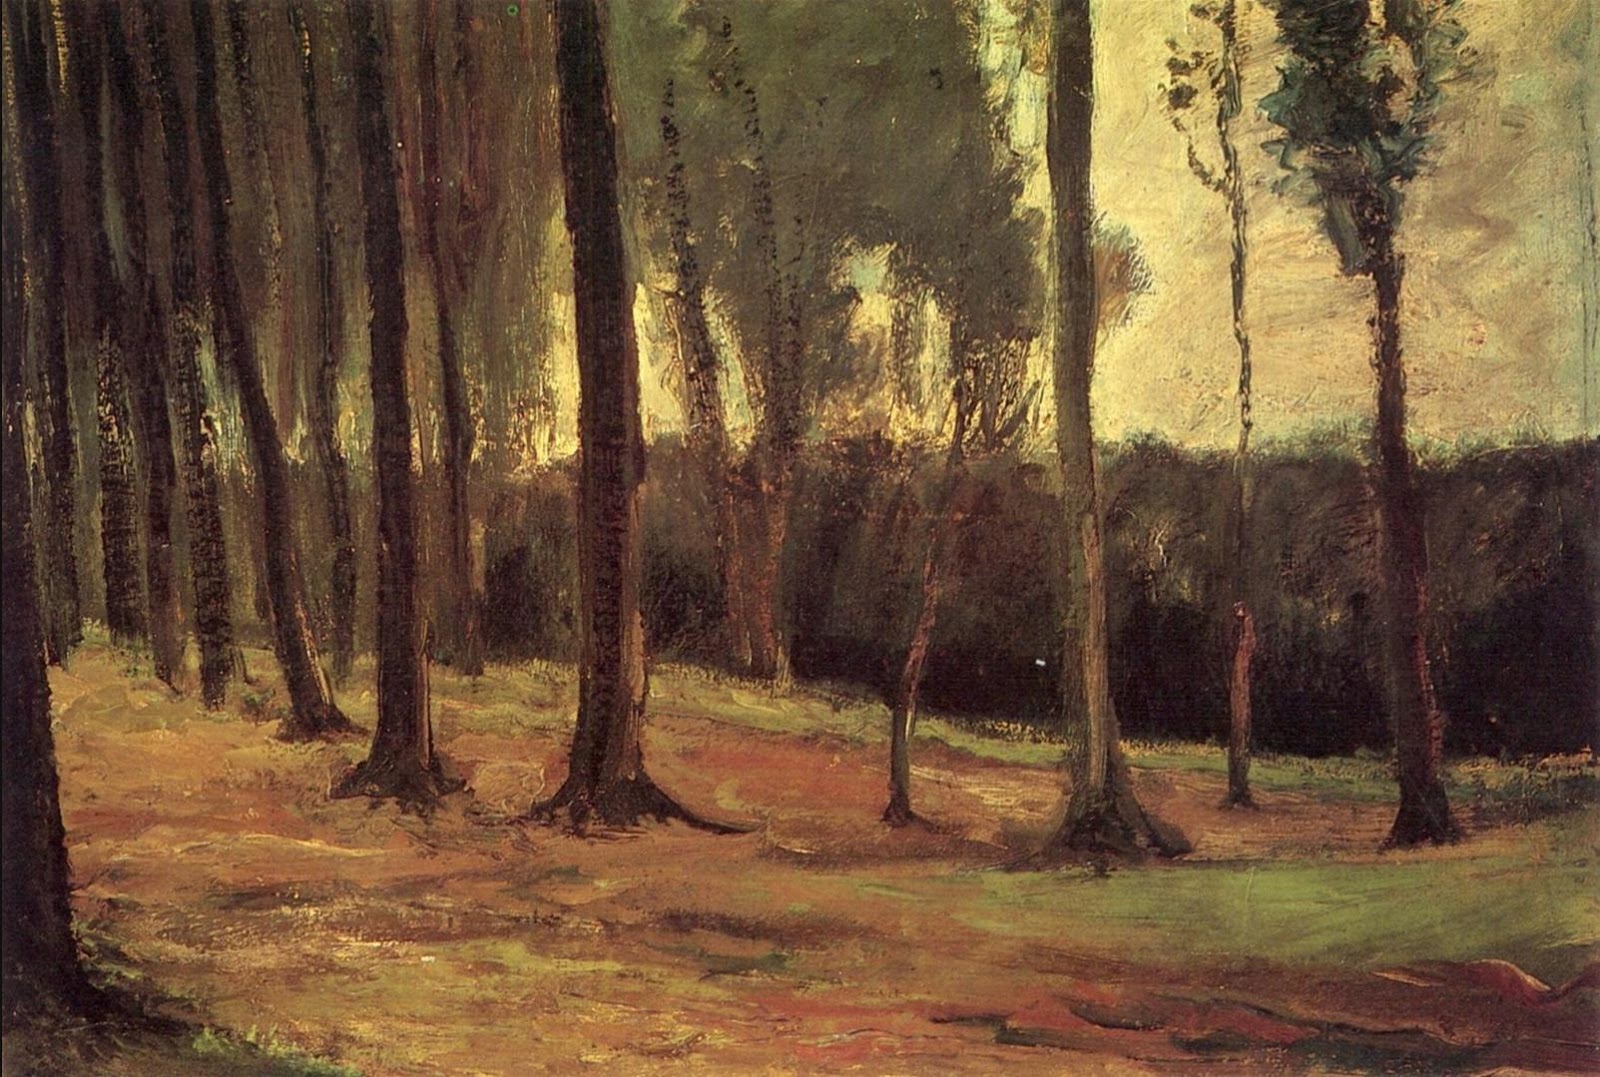 Edge of a Wood by Vincent van Gogh